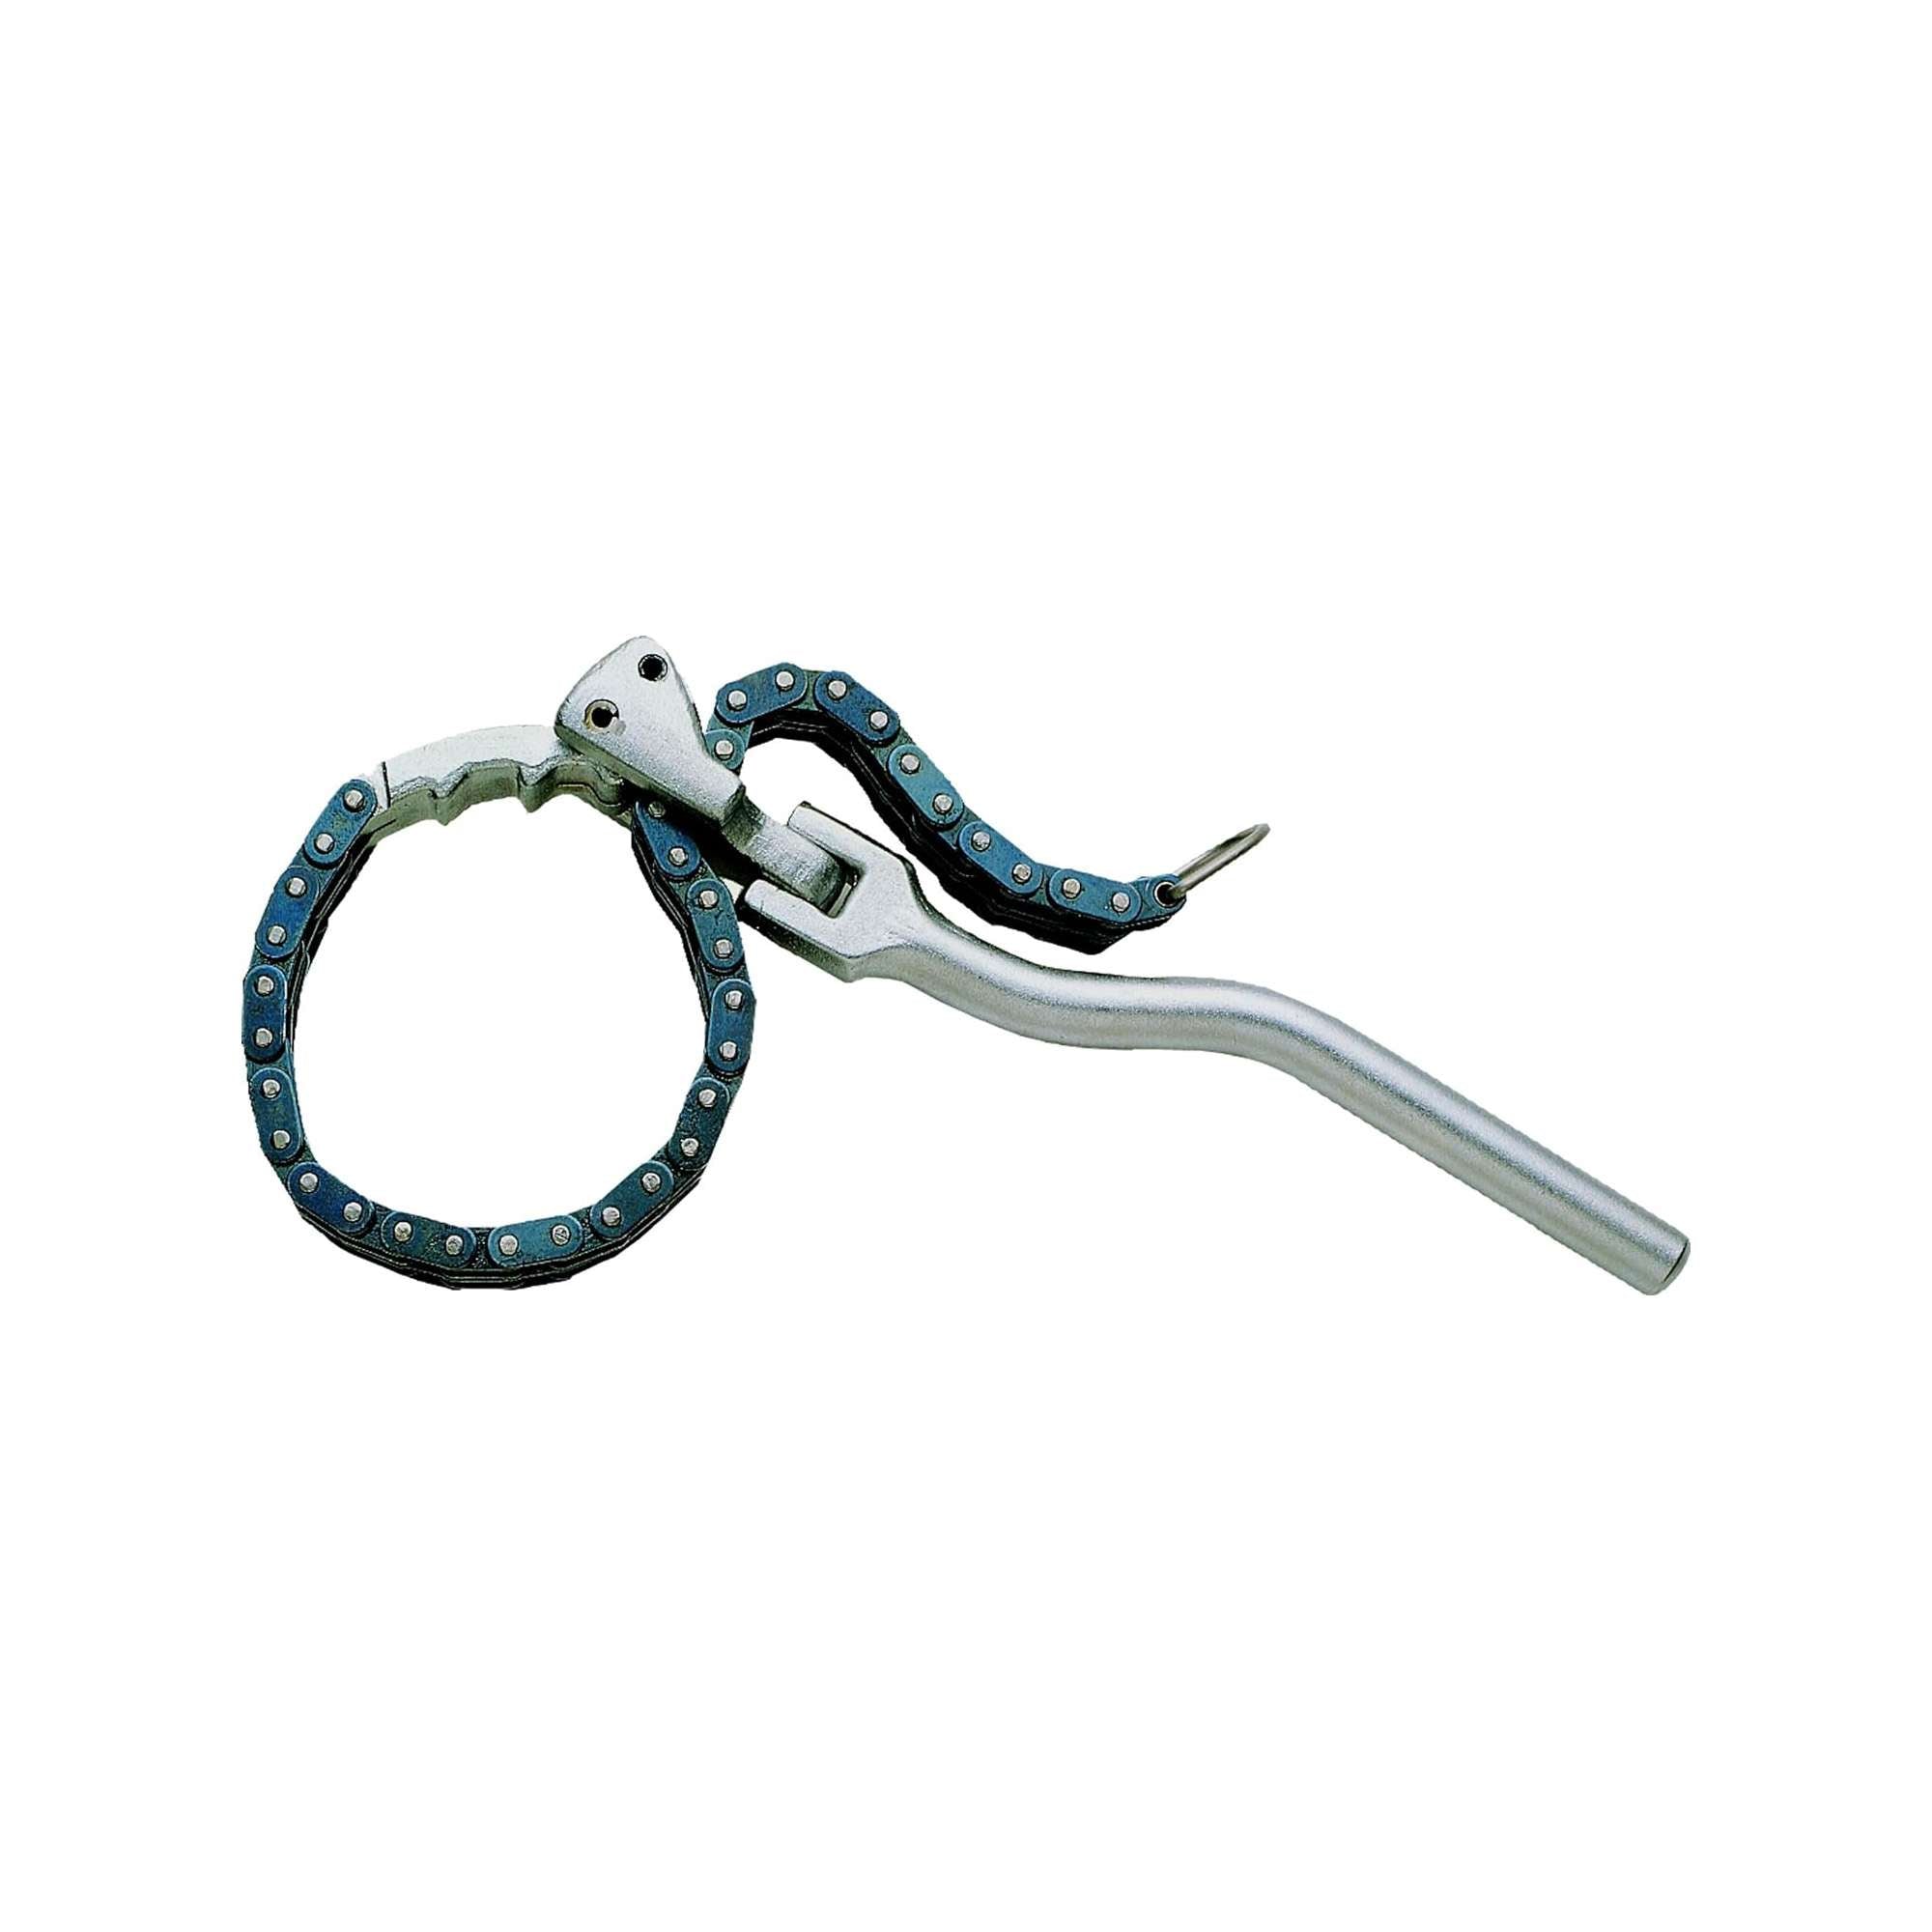 Chain jointed spanner for oil filters capacity 60110mm - Usag 445